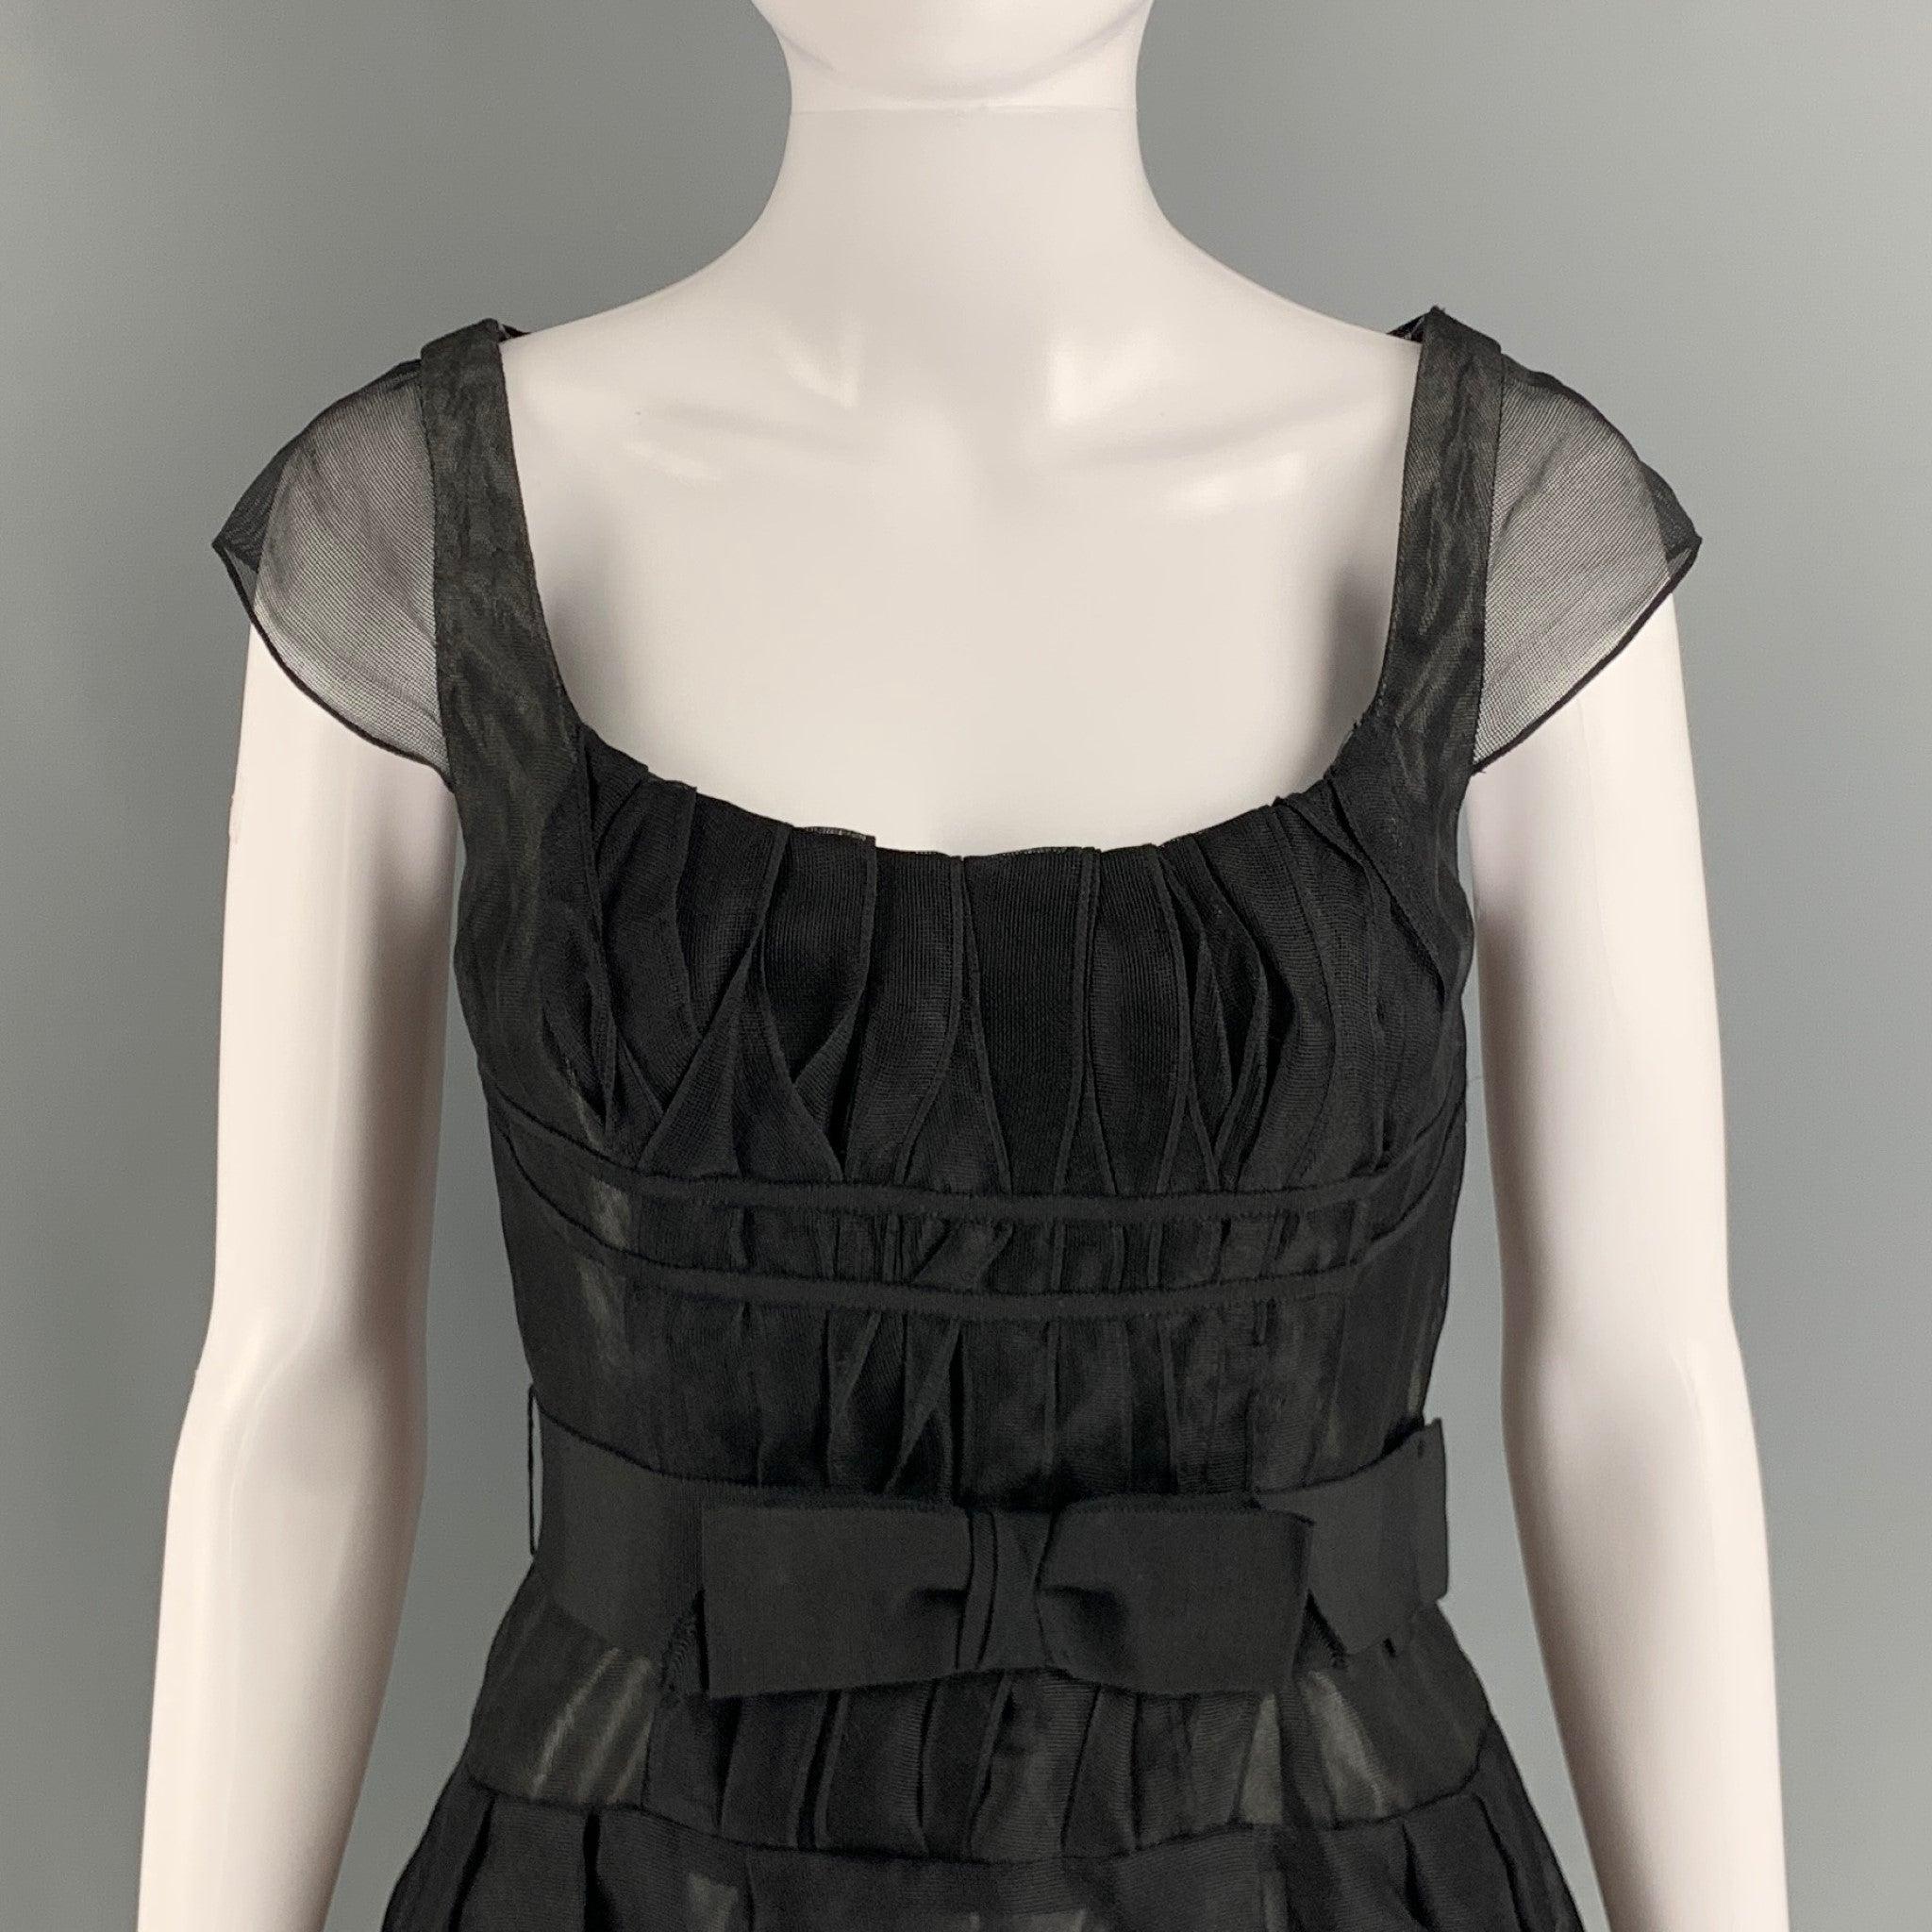 CAROLINA HERRERA A-line knee high dress comes in black silk tulle woven material and half invisible zipper closure at center back featuring cap sleeve, see through style and bow belted at center front of waistband. Made in USA.Excellent Pre-Owned